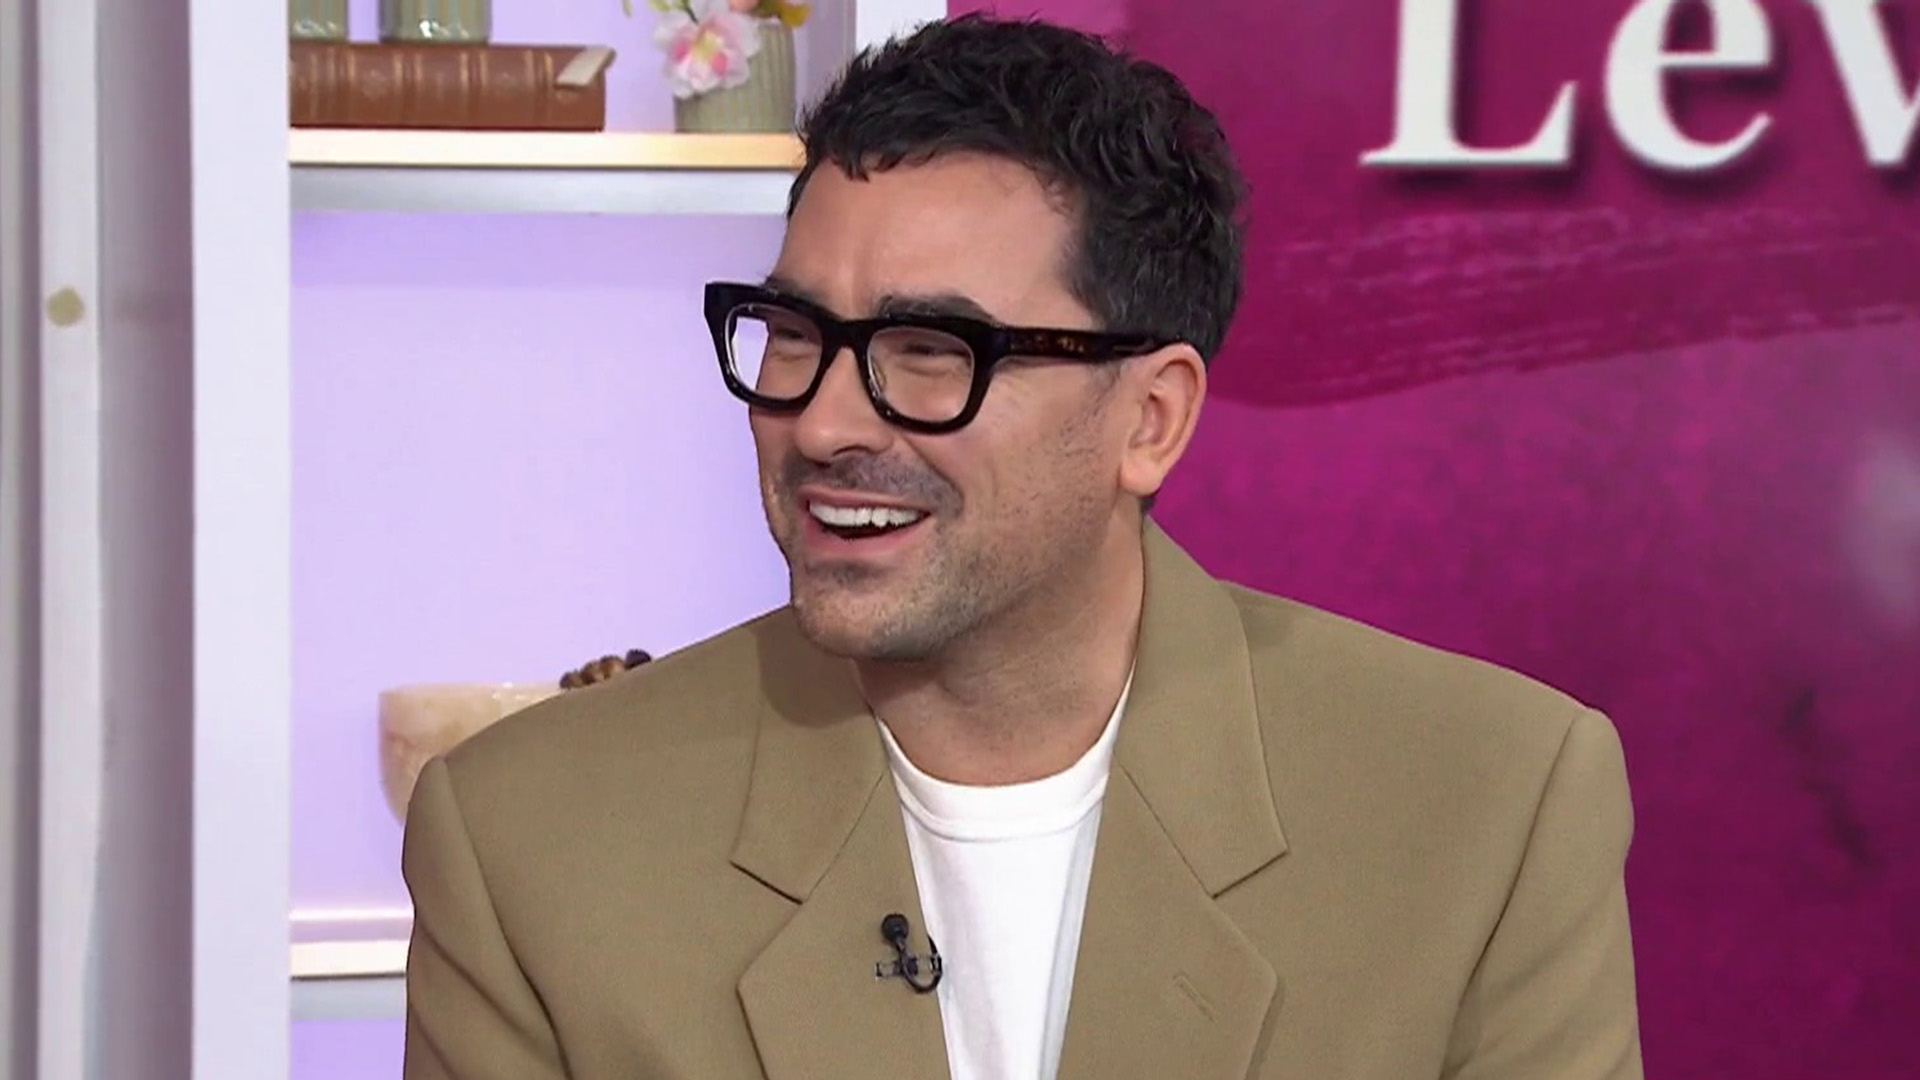 Dan Levy says new film 'Good Grief' brought his parents to tears